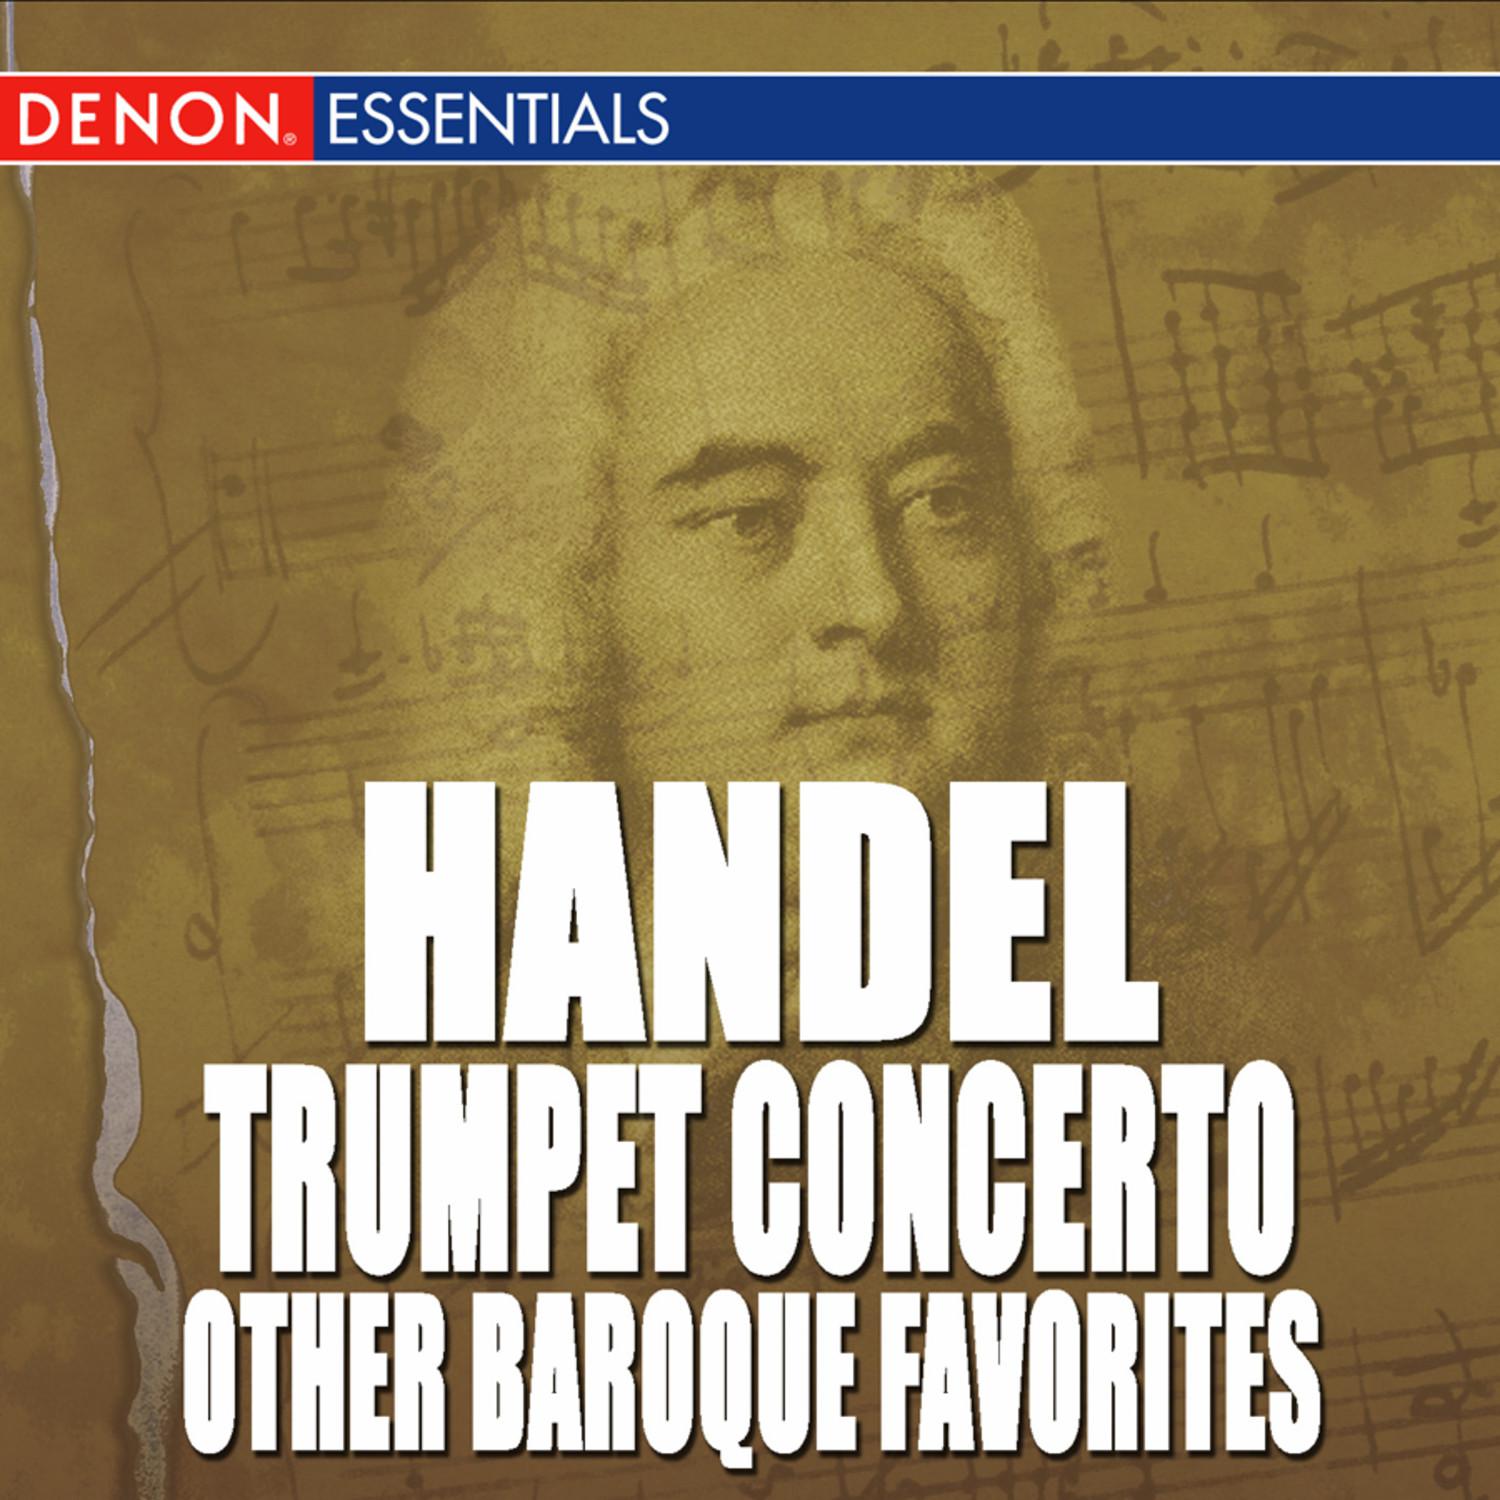 Concerto for Trumpet, Strings and B.c. in B Major: I. Adagio